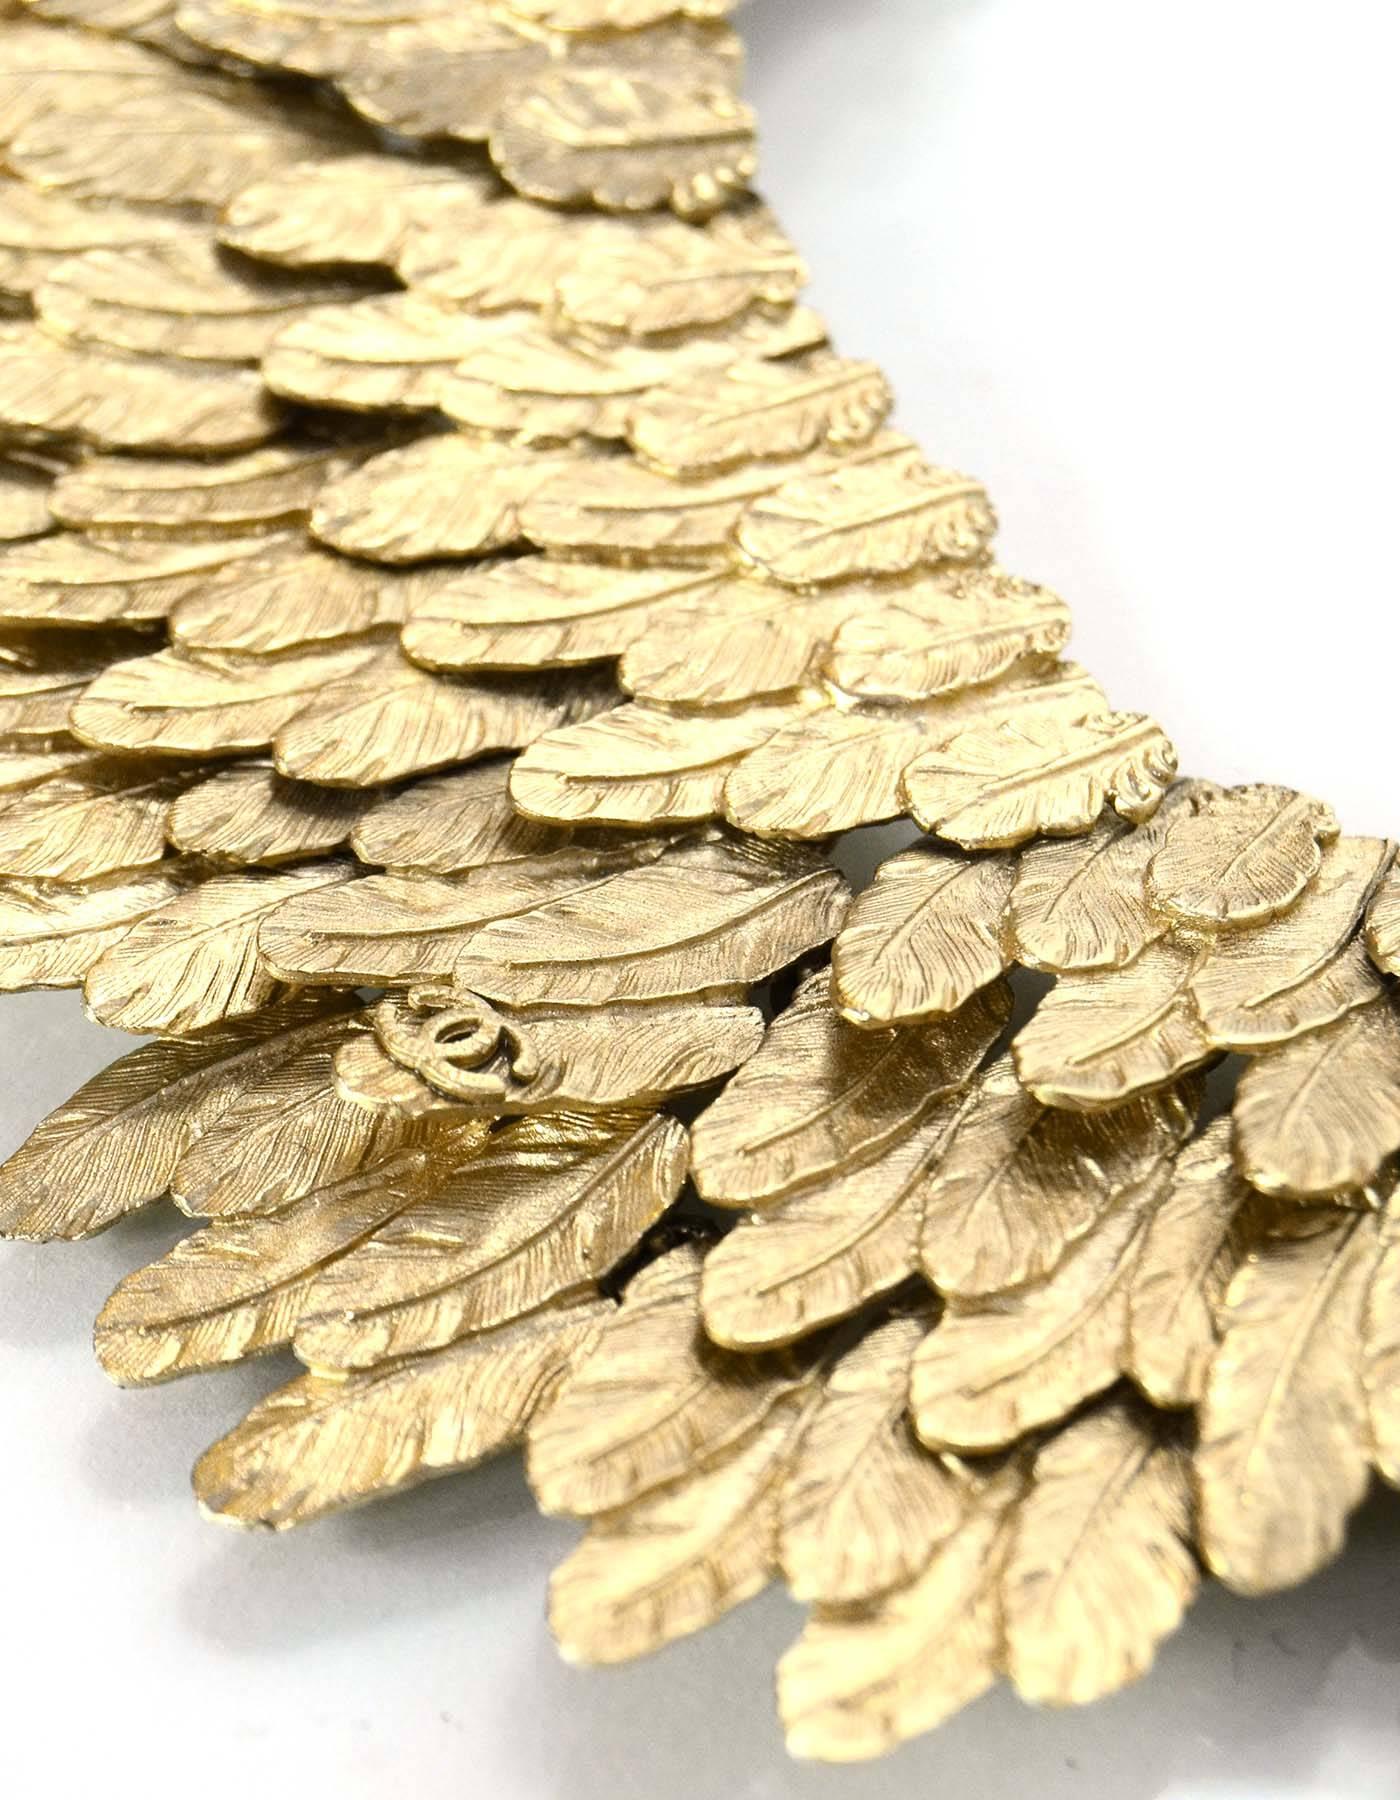 100% Authentic Chanel Goldtone Stacked Feather Collar Choker Necklace. This a-symmetrical necklace features rows of textured stacked feathers complimented with a CC on a front feather.

Made In: France
Year of Production: 2008
Color: Light